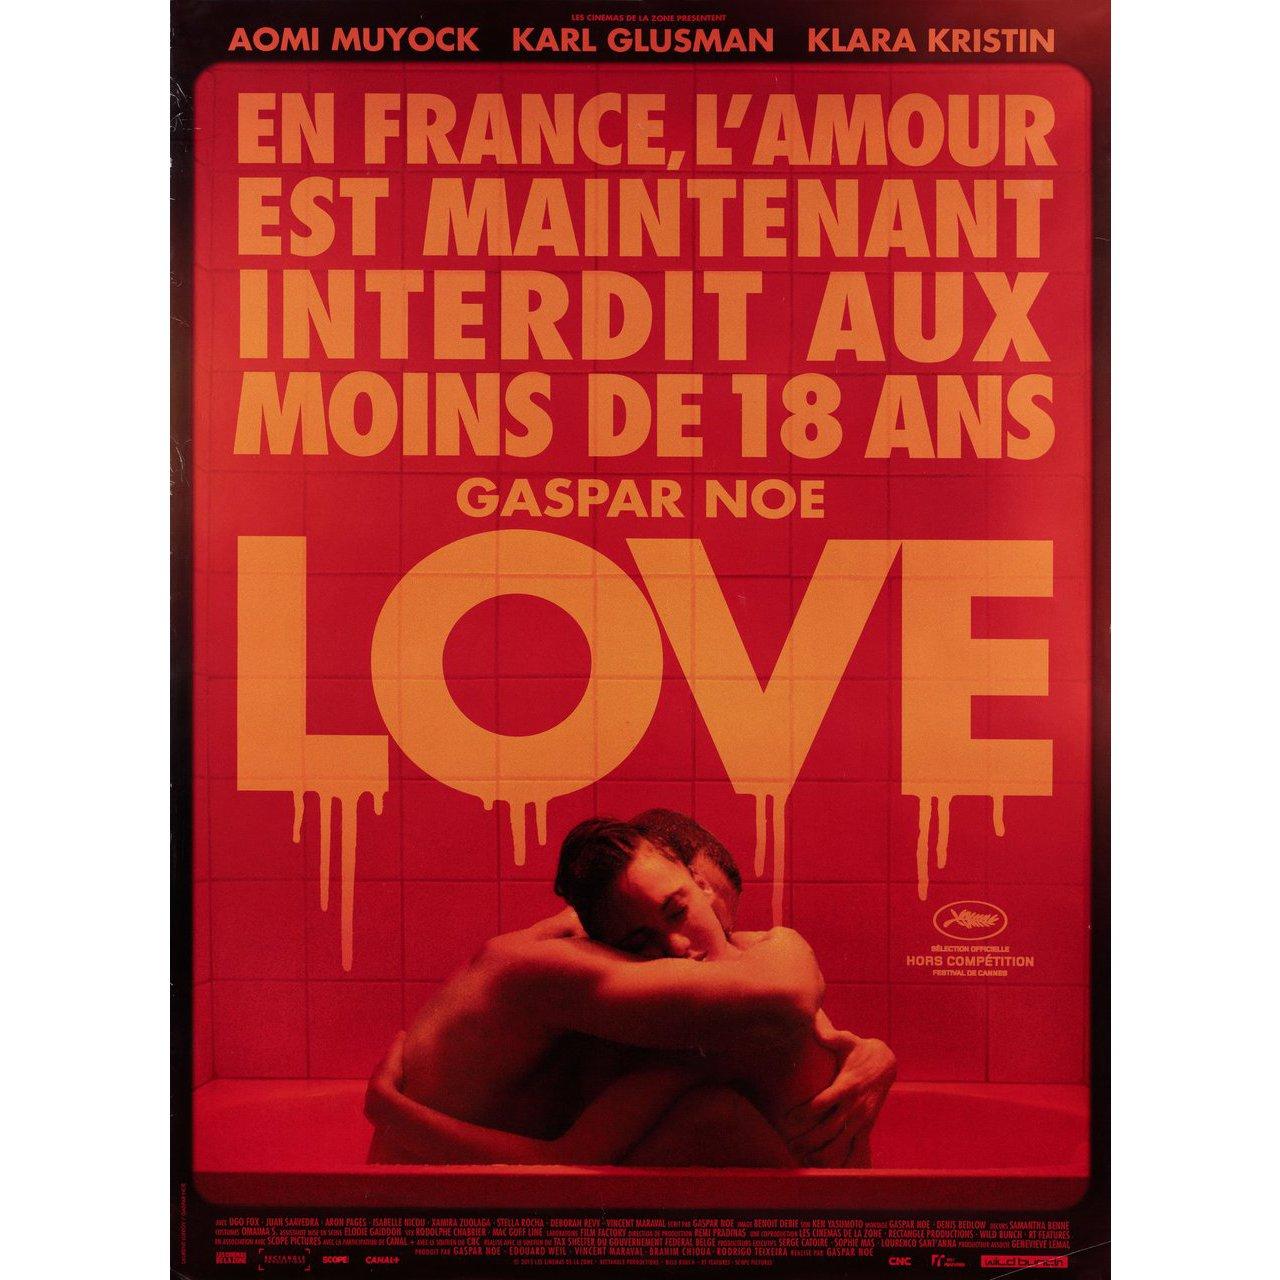 Original 2015 French grande poster by Laurent Lufroy for the film Love directed by Gaspar Noe with Aomi Muyock / Karl Glusman / Klara Kristin. Very Good-Fine condition, rolled. Please note: the size is stated in inches and the actual size can vary